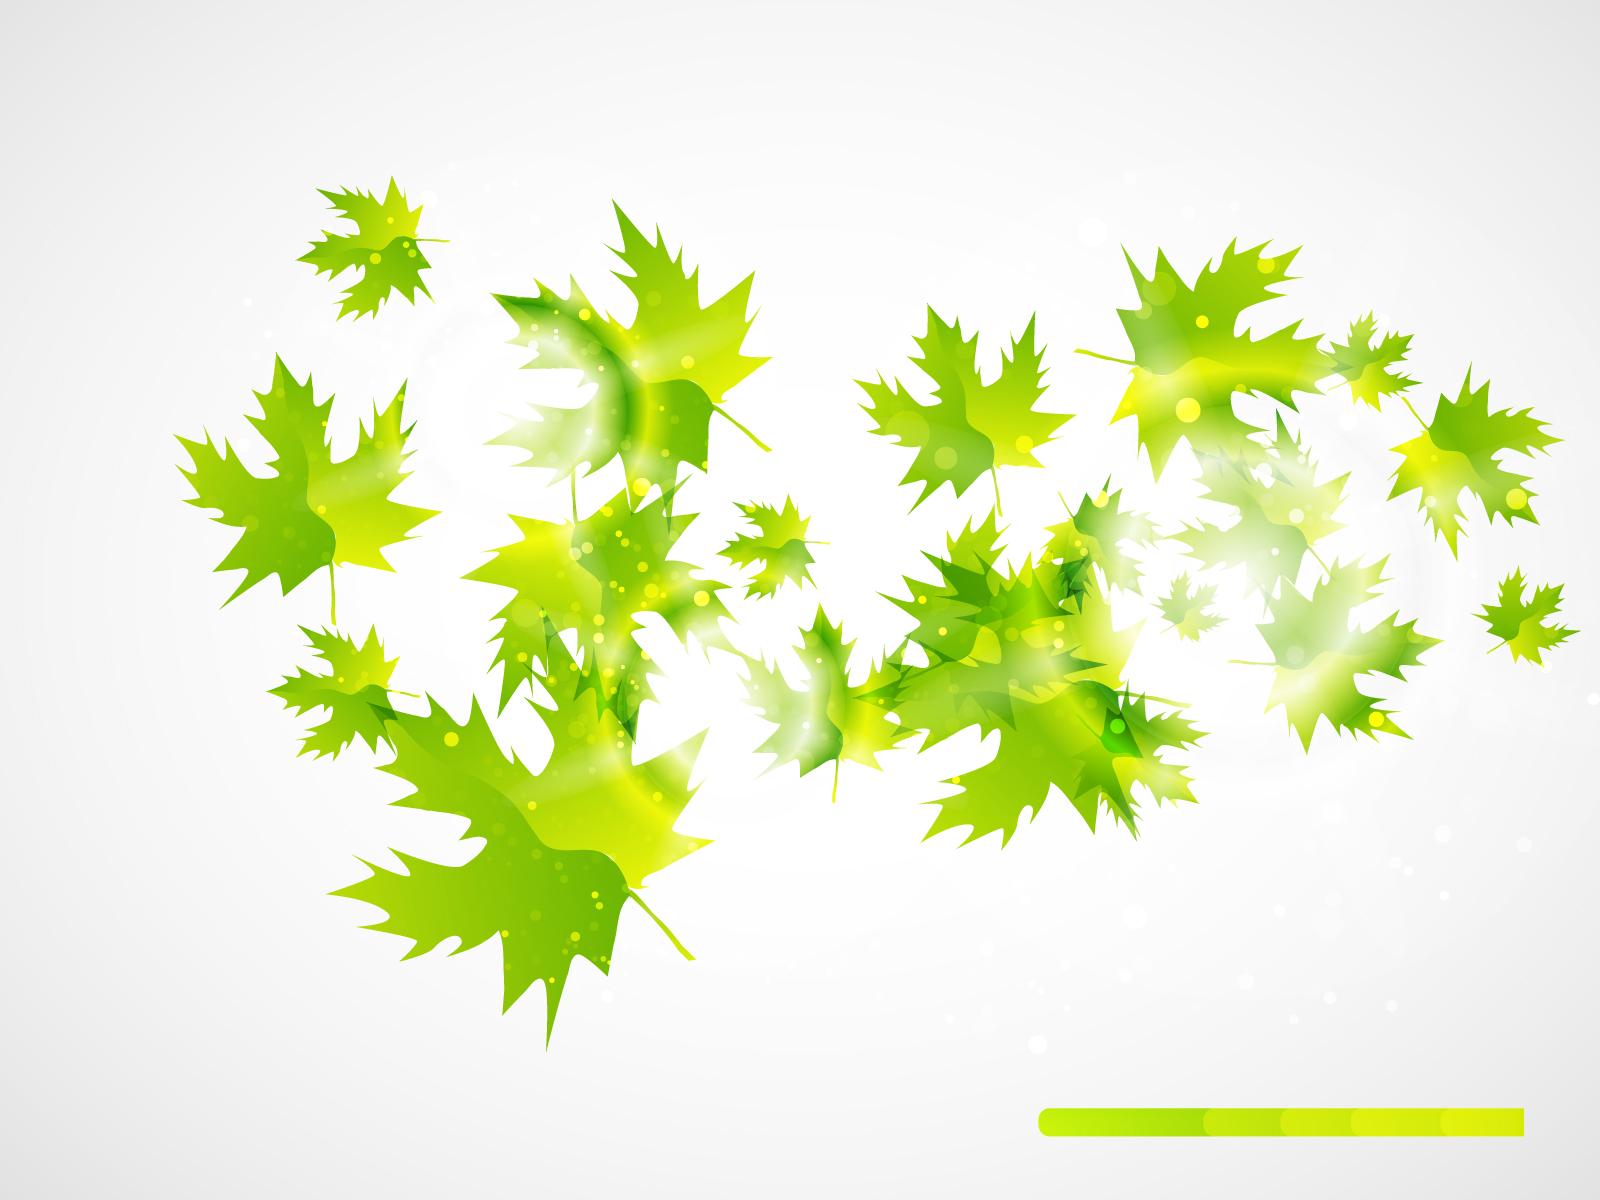 Abstract Leaves Backgrounds | Abstract, Colors, Green, Grey, Nature, White,  Yellow Templates | Free PPT Grounds